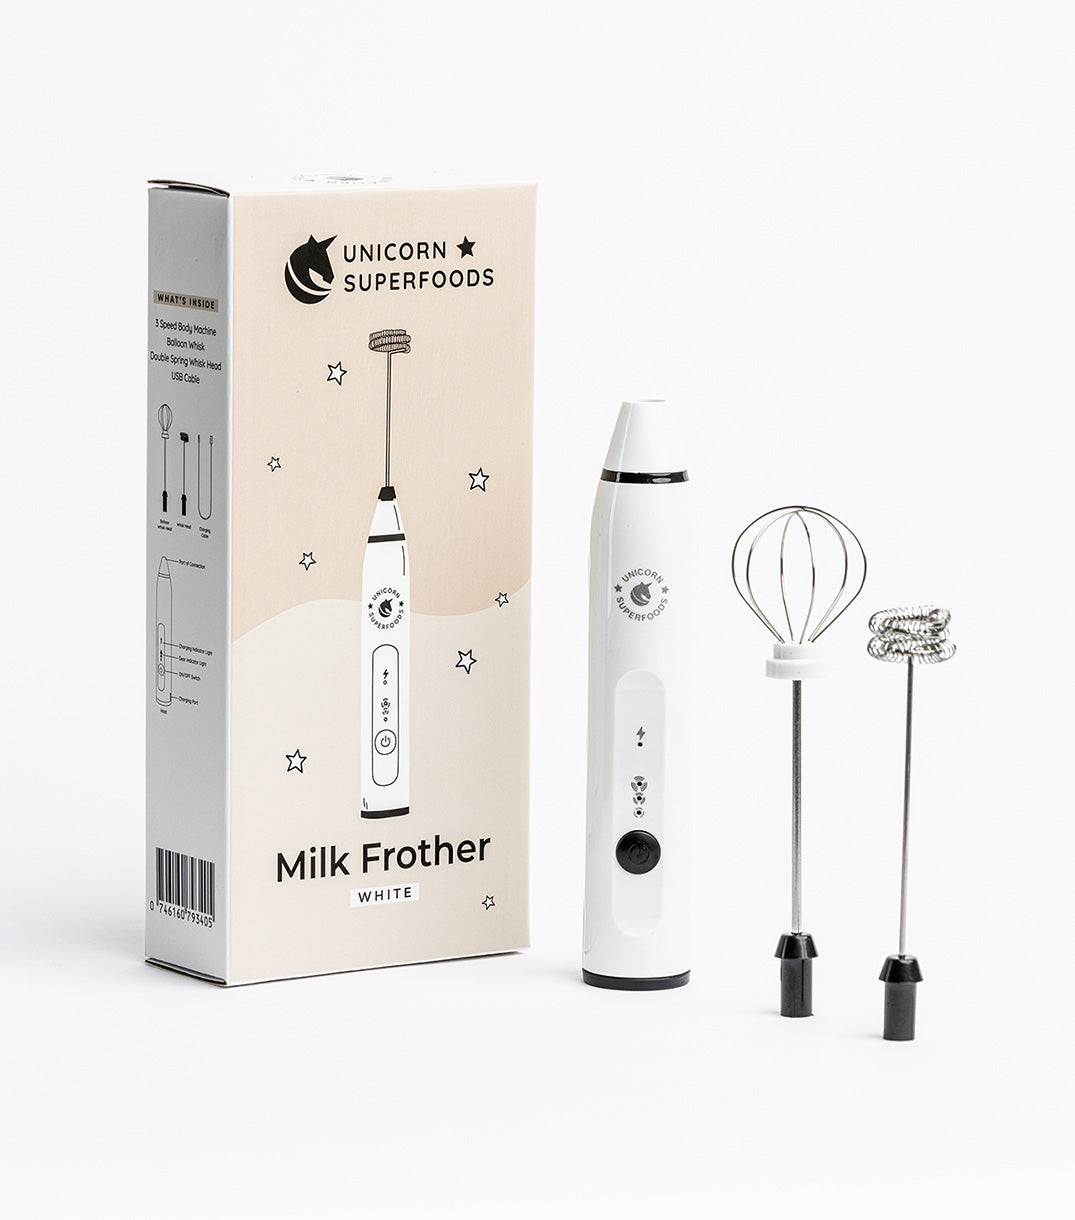 Hand-Held Frother - Ancient Nutrition